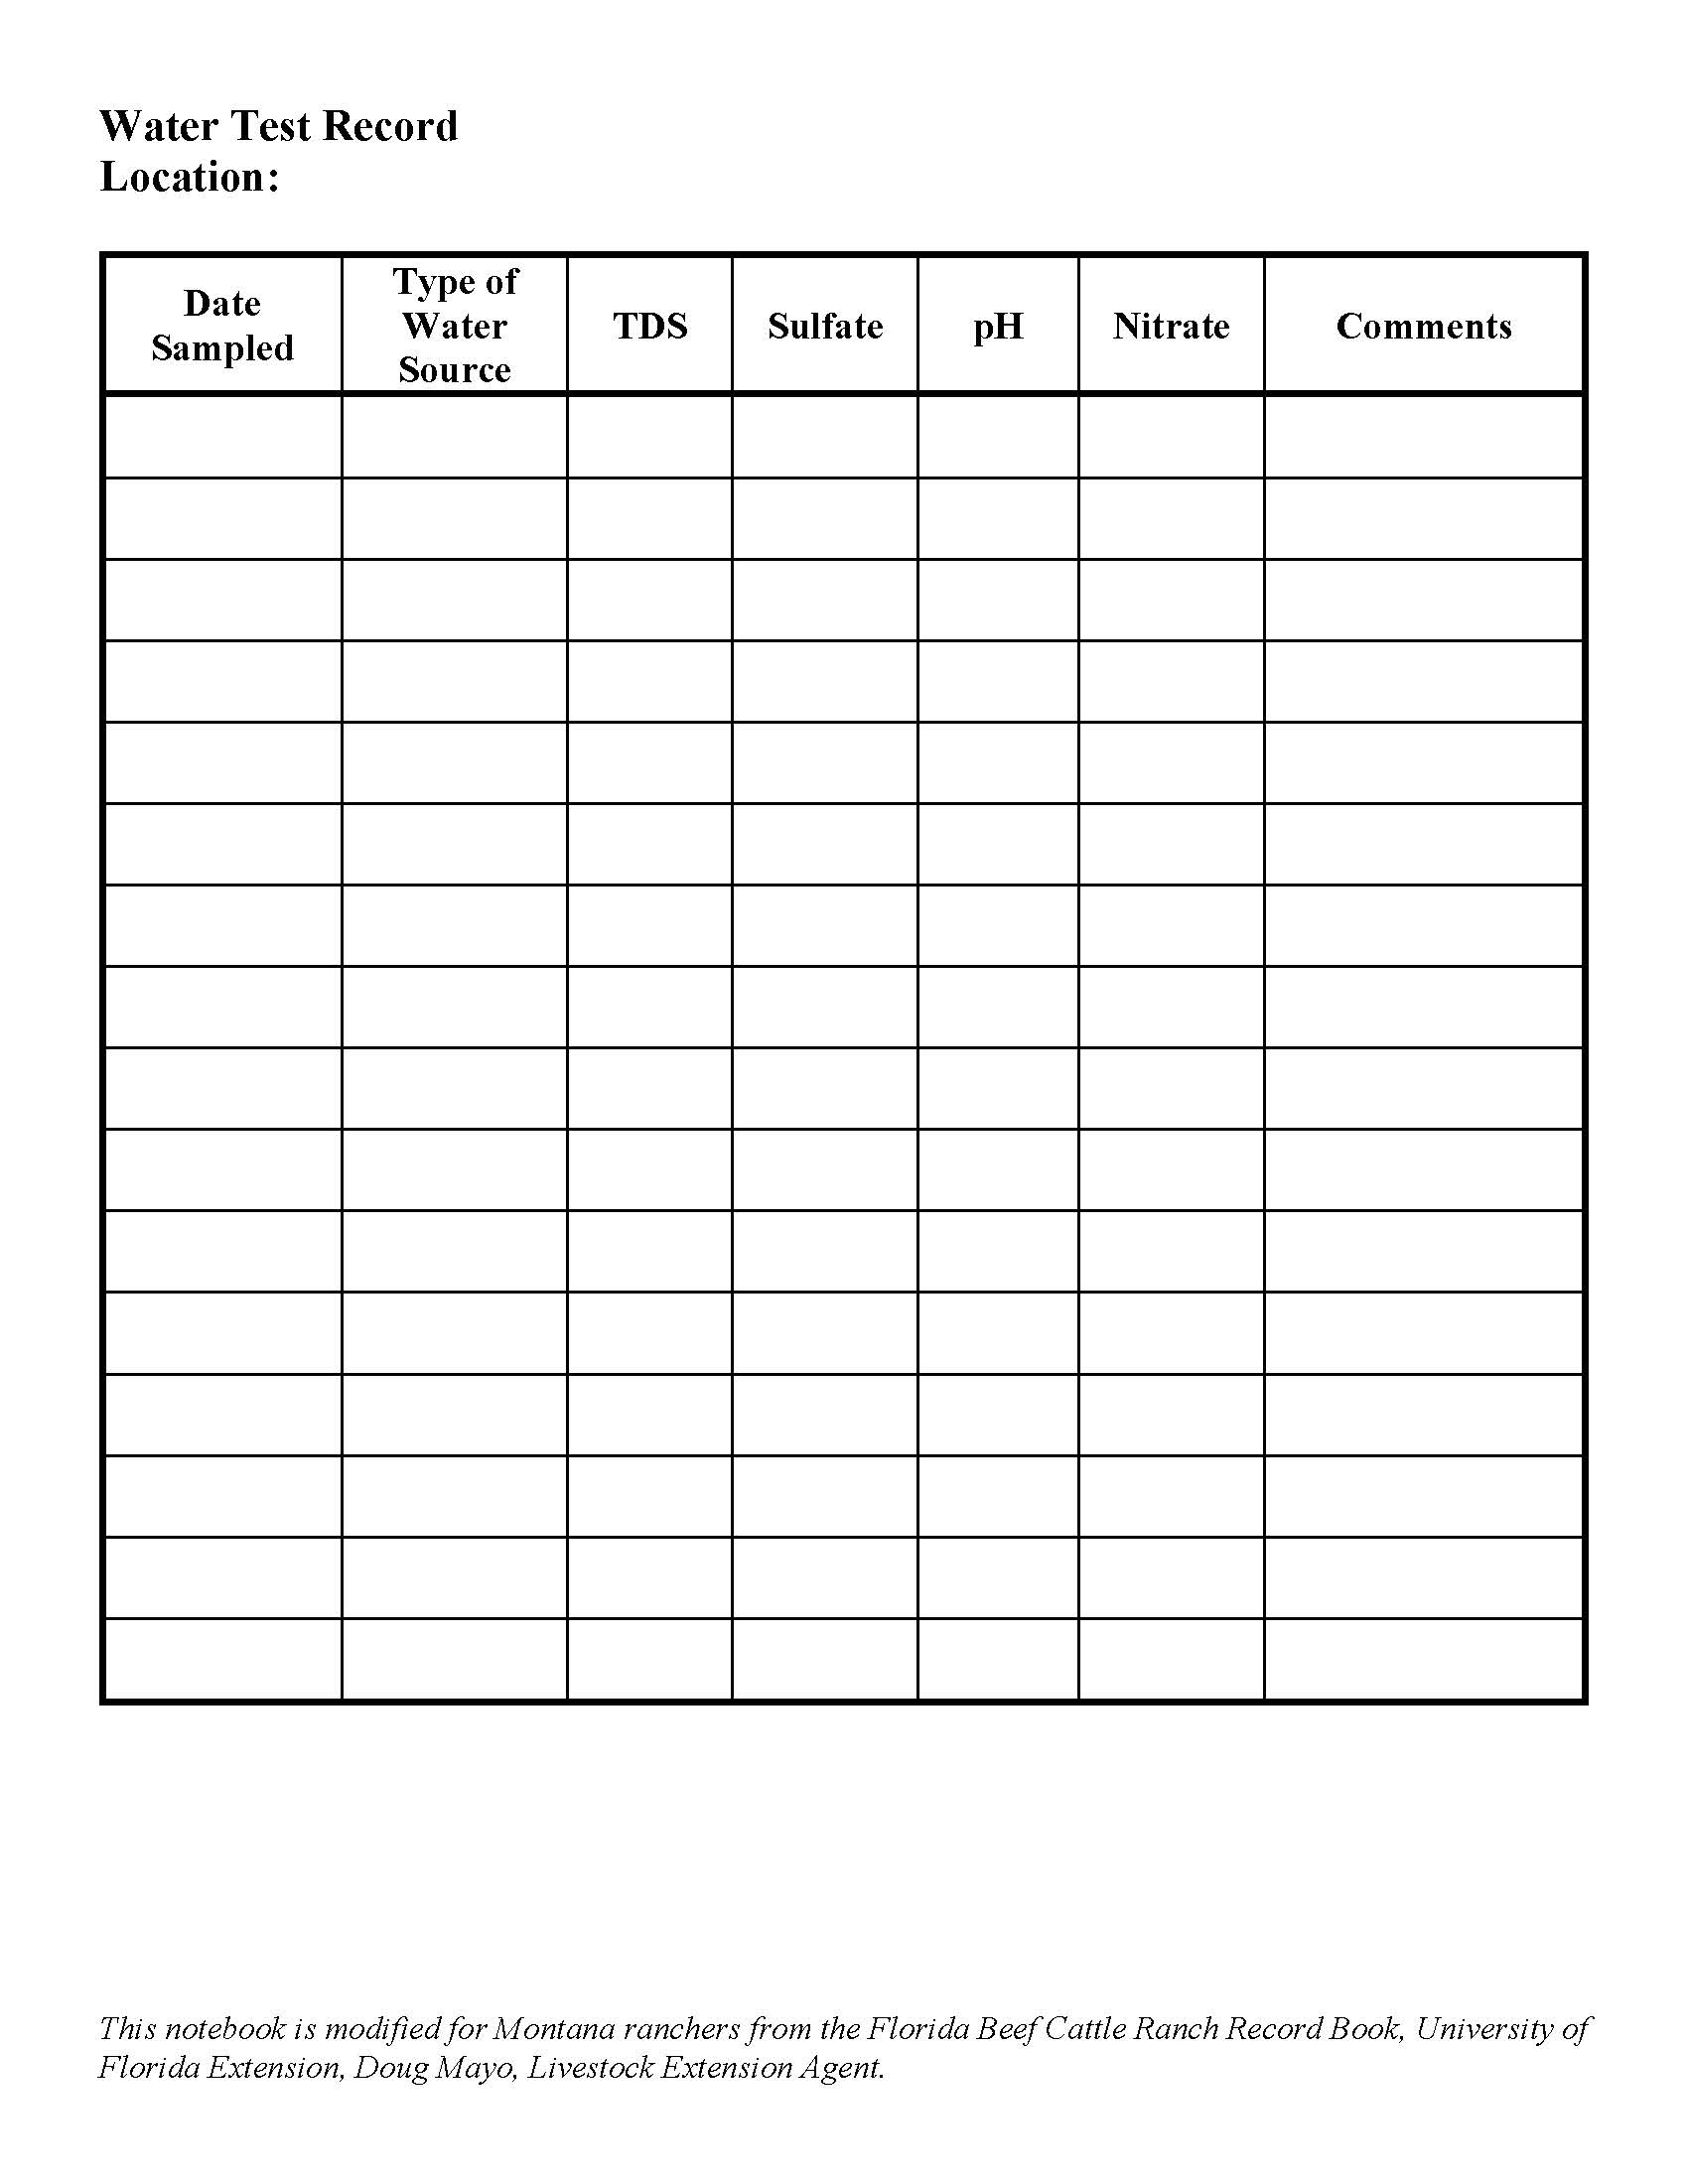 A sample table for keeping water testing records. Used in rancher notebook.